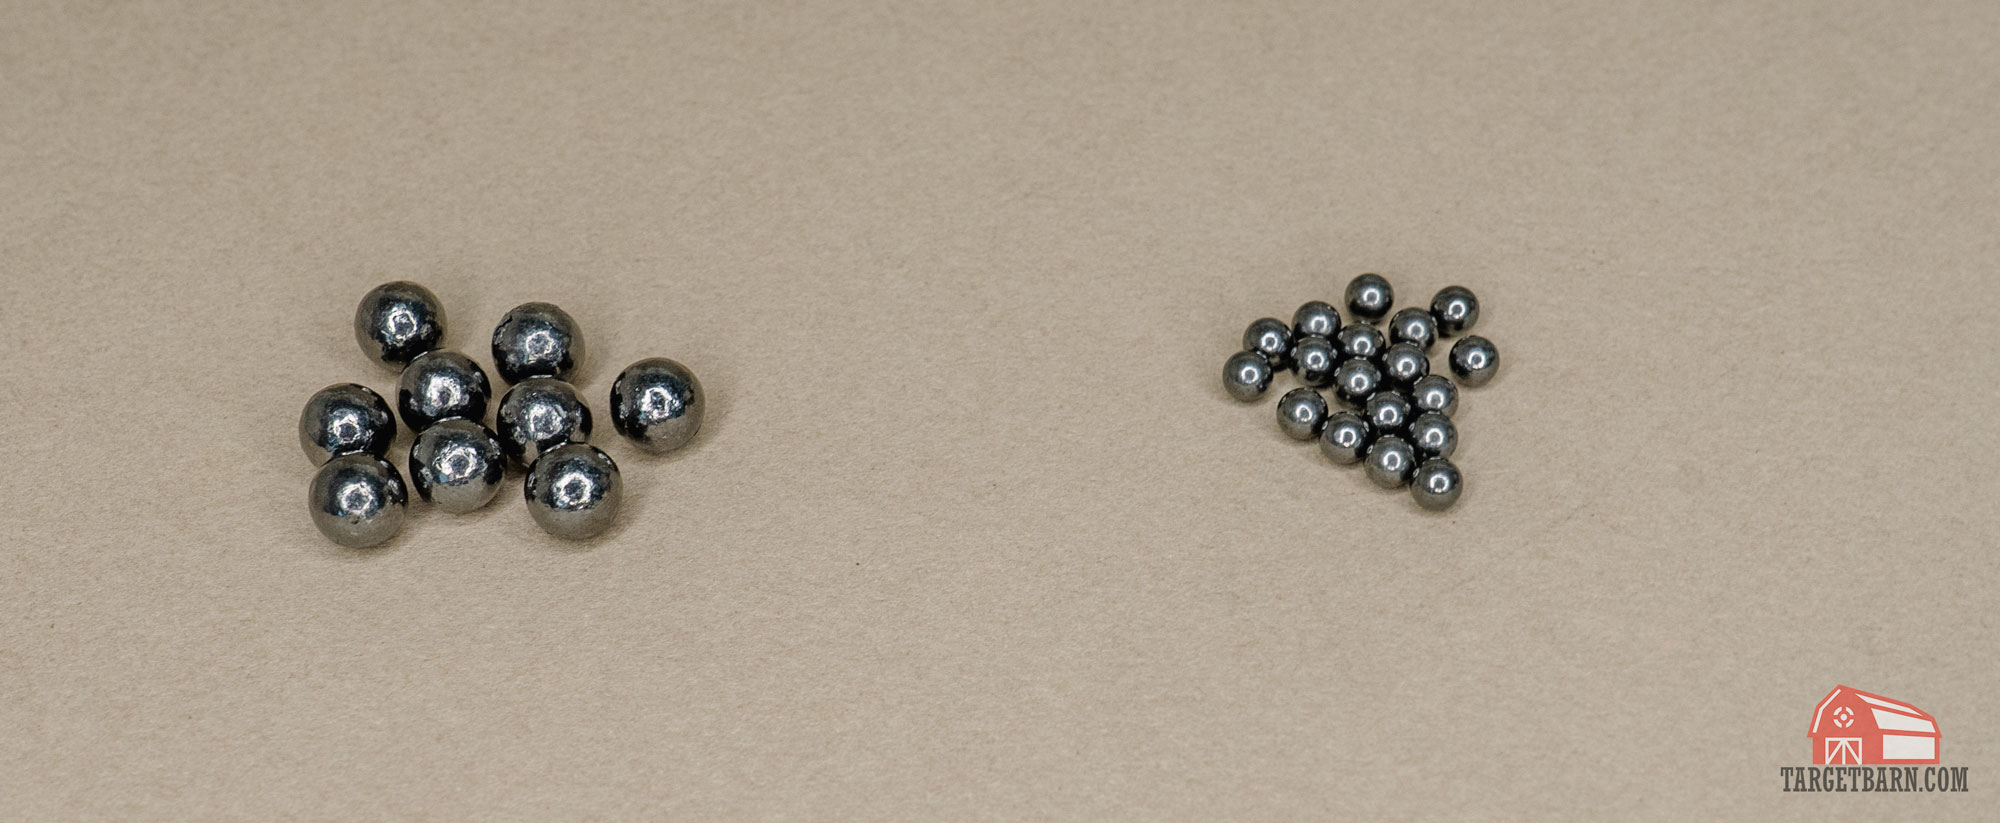 lead shot pellets on the left and BB steel shot pellets on the right